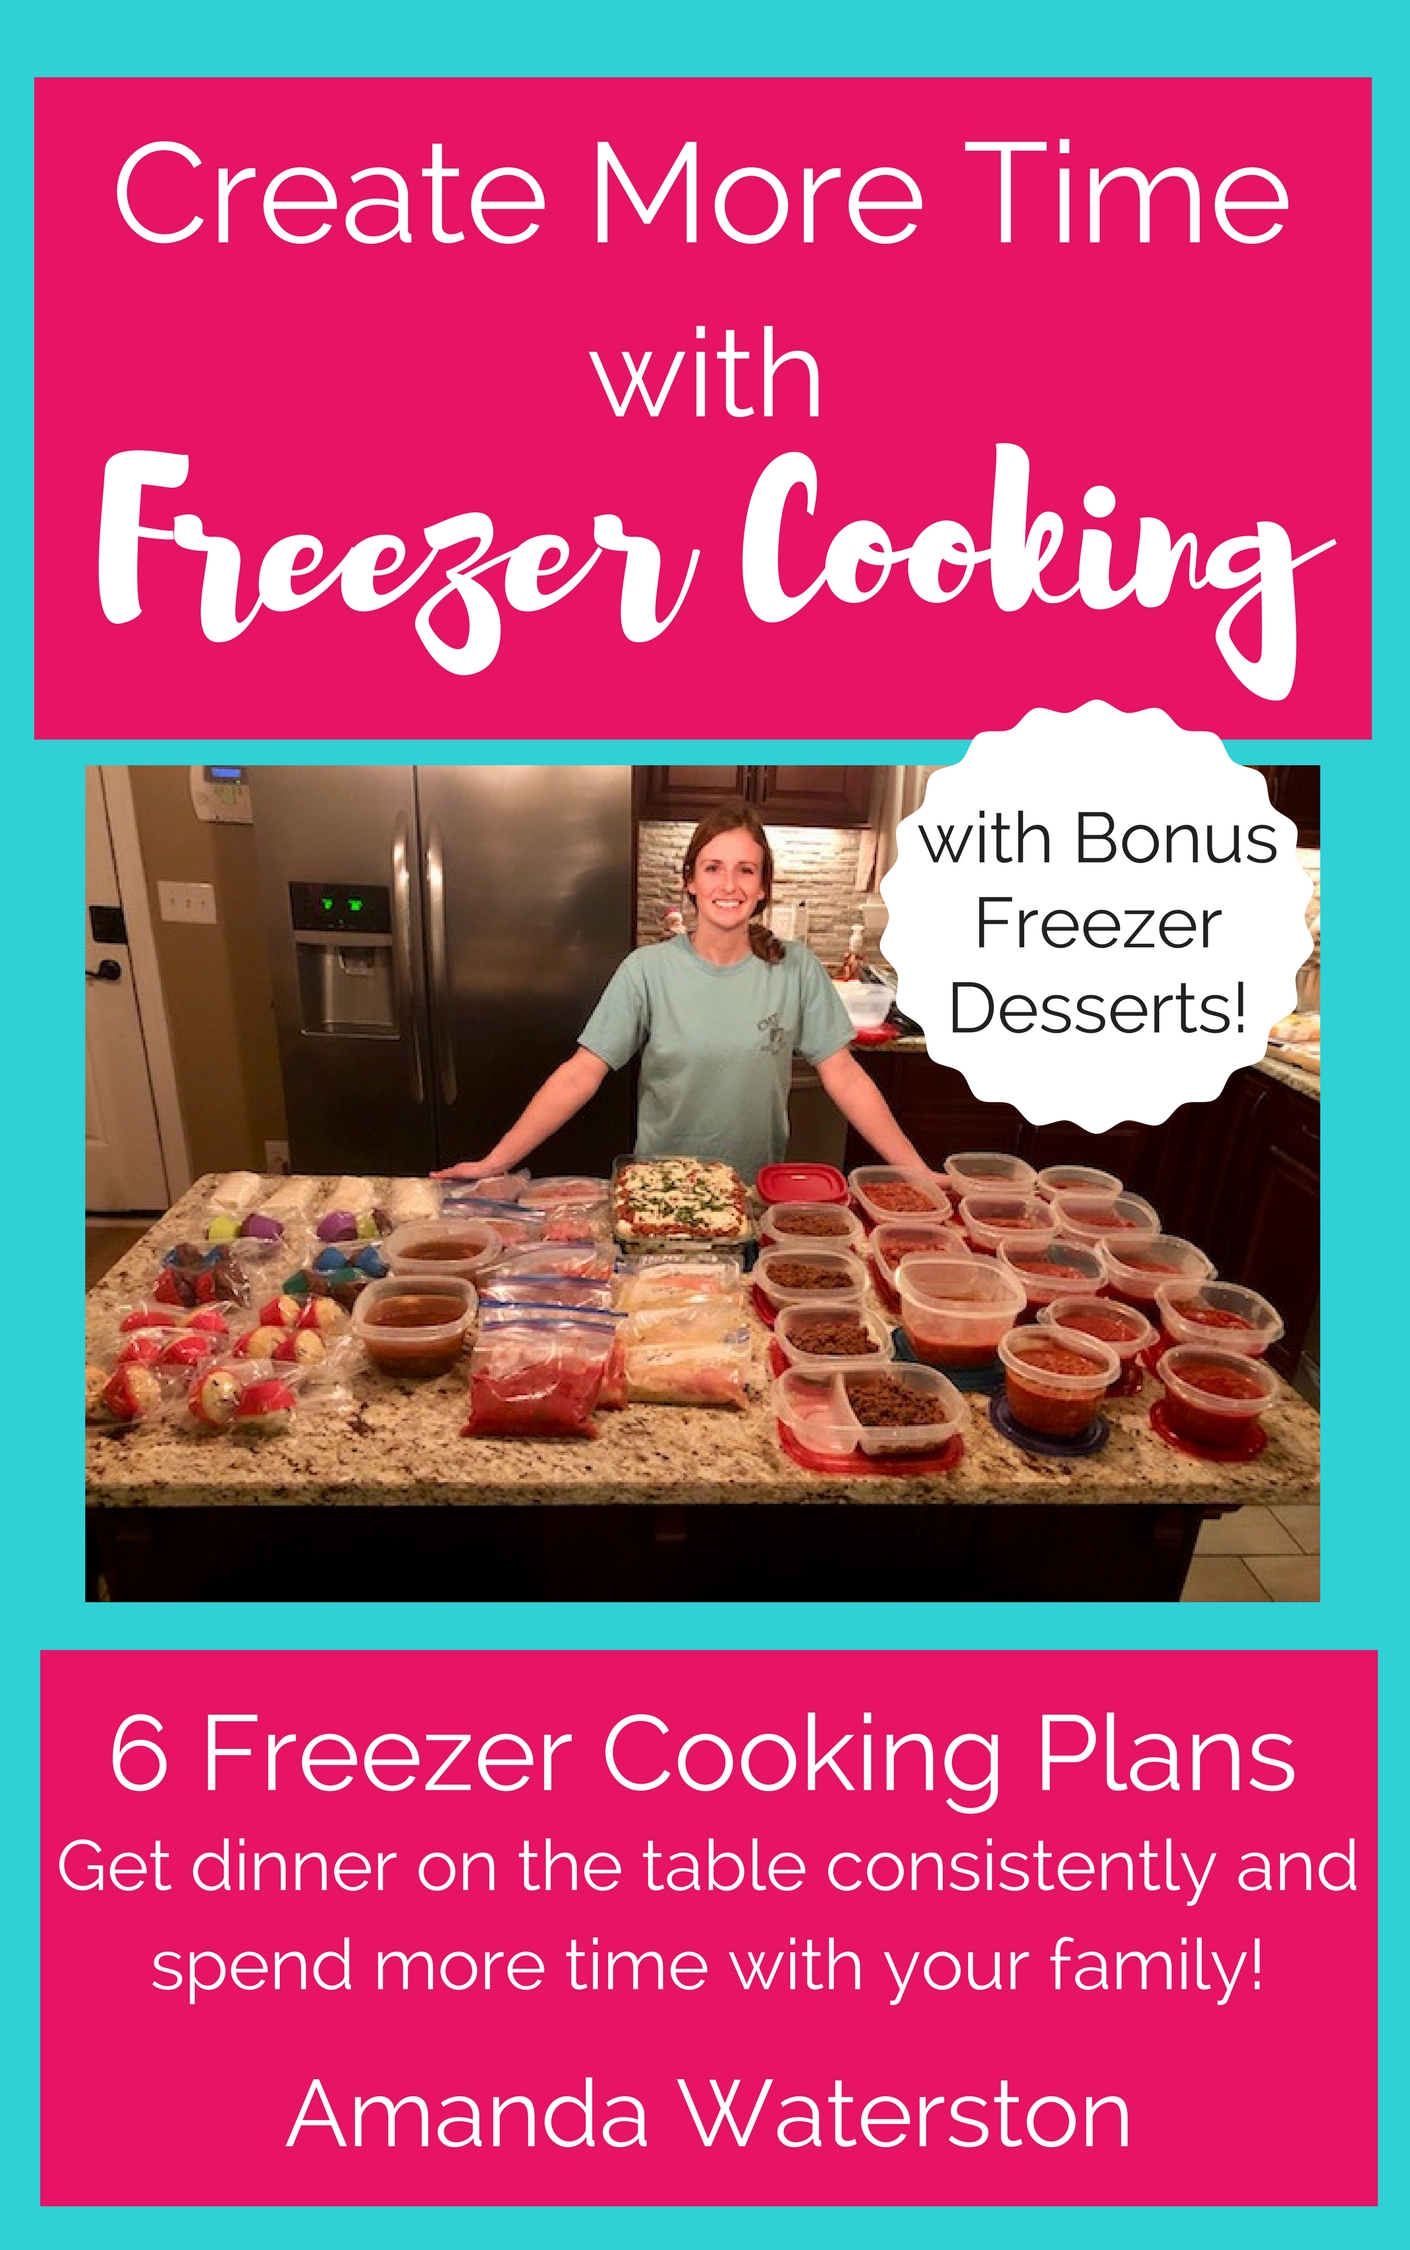 Create More Time With Freezer Cooking - The Little Frugal House